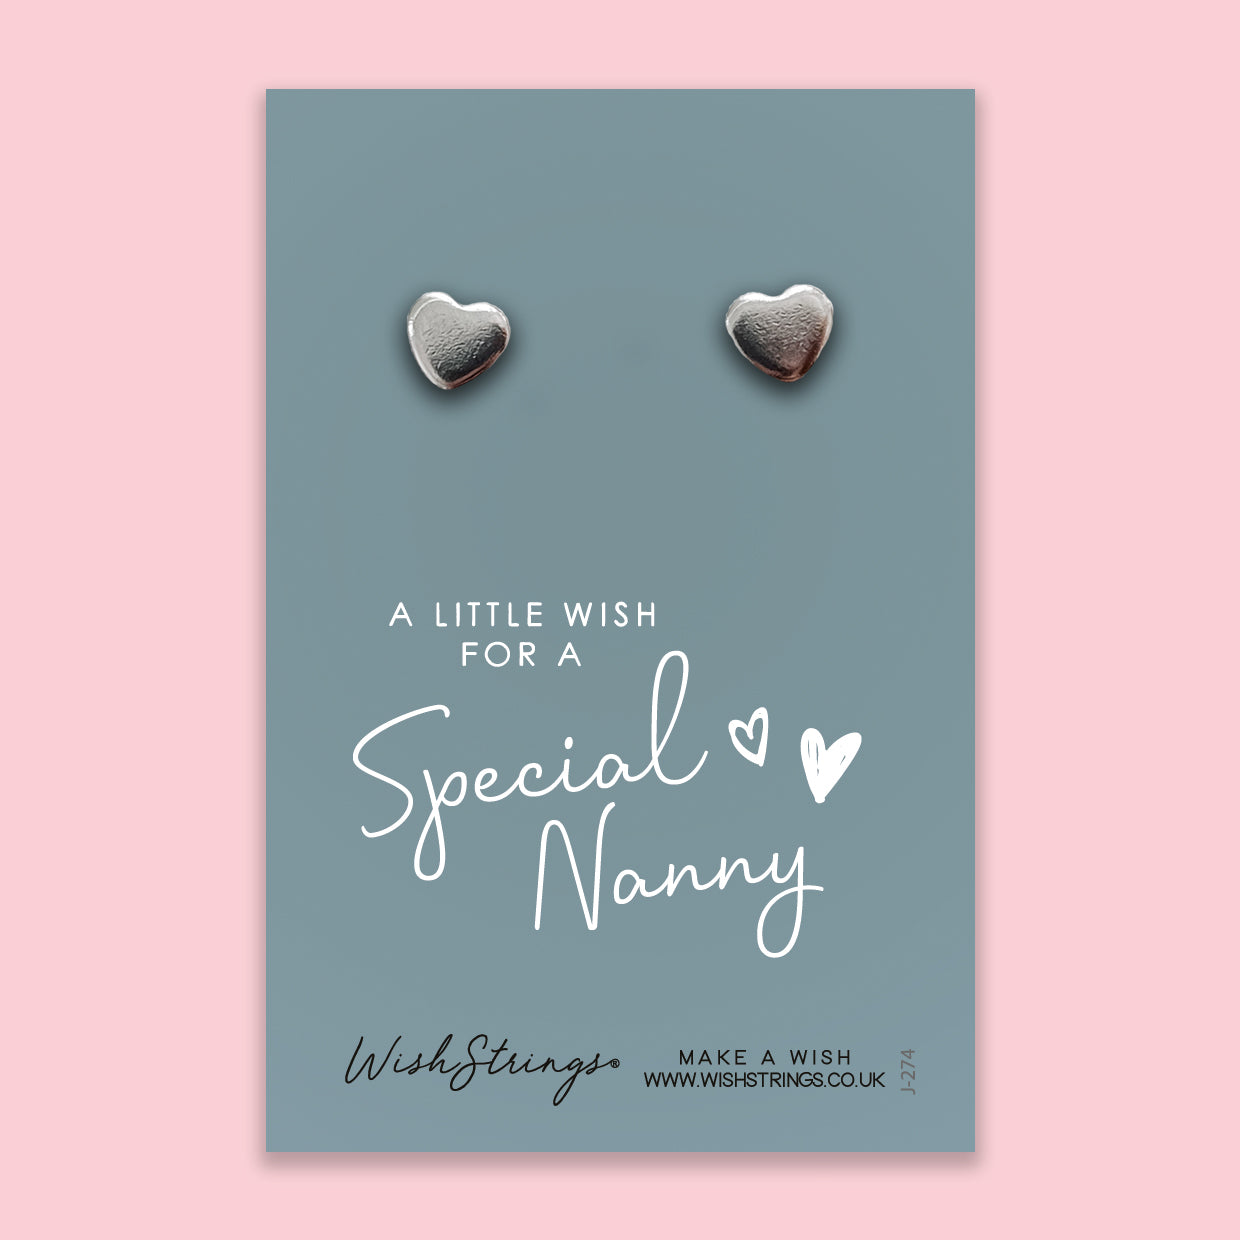 Special Nanny - Silver Heart Stud Earrings | 304 Stainless - Hypoallergenic